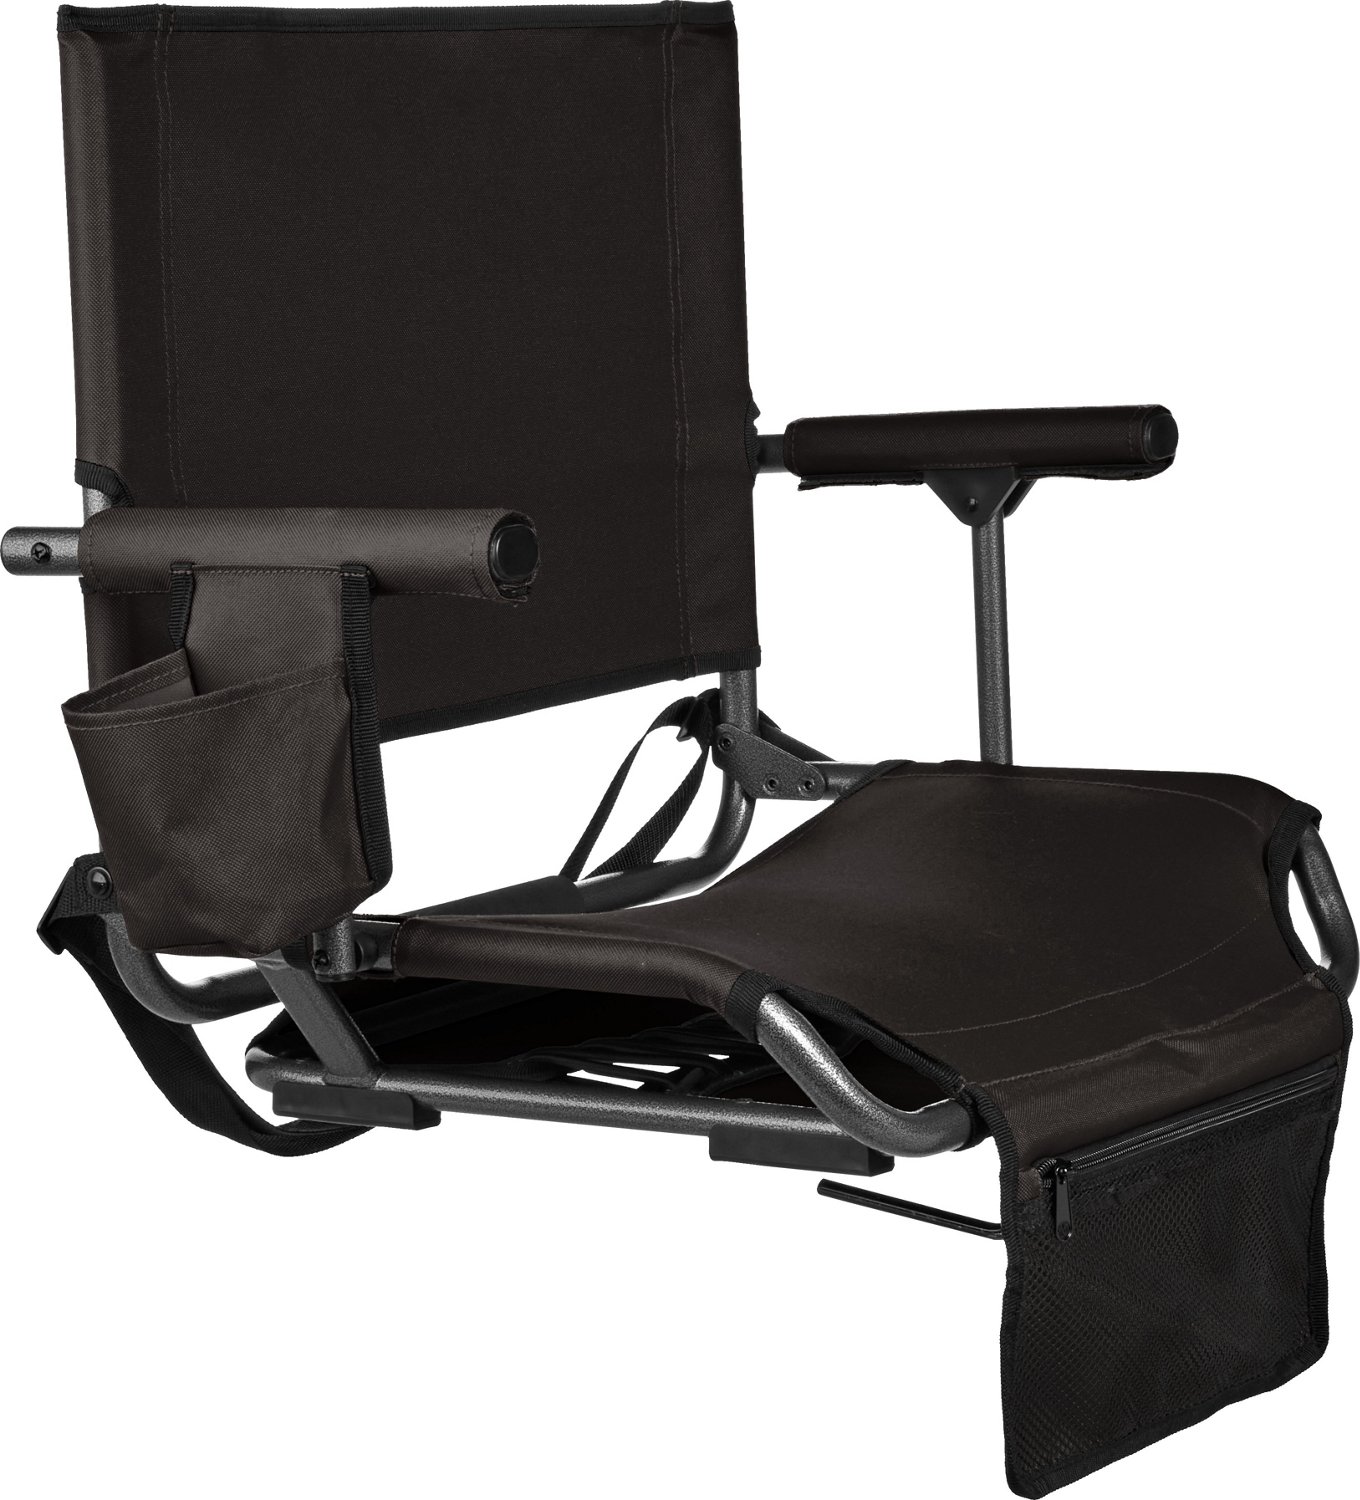 Academy Sports + Outdoors Deluxe Padded Stadium Seat